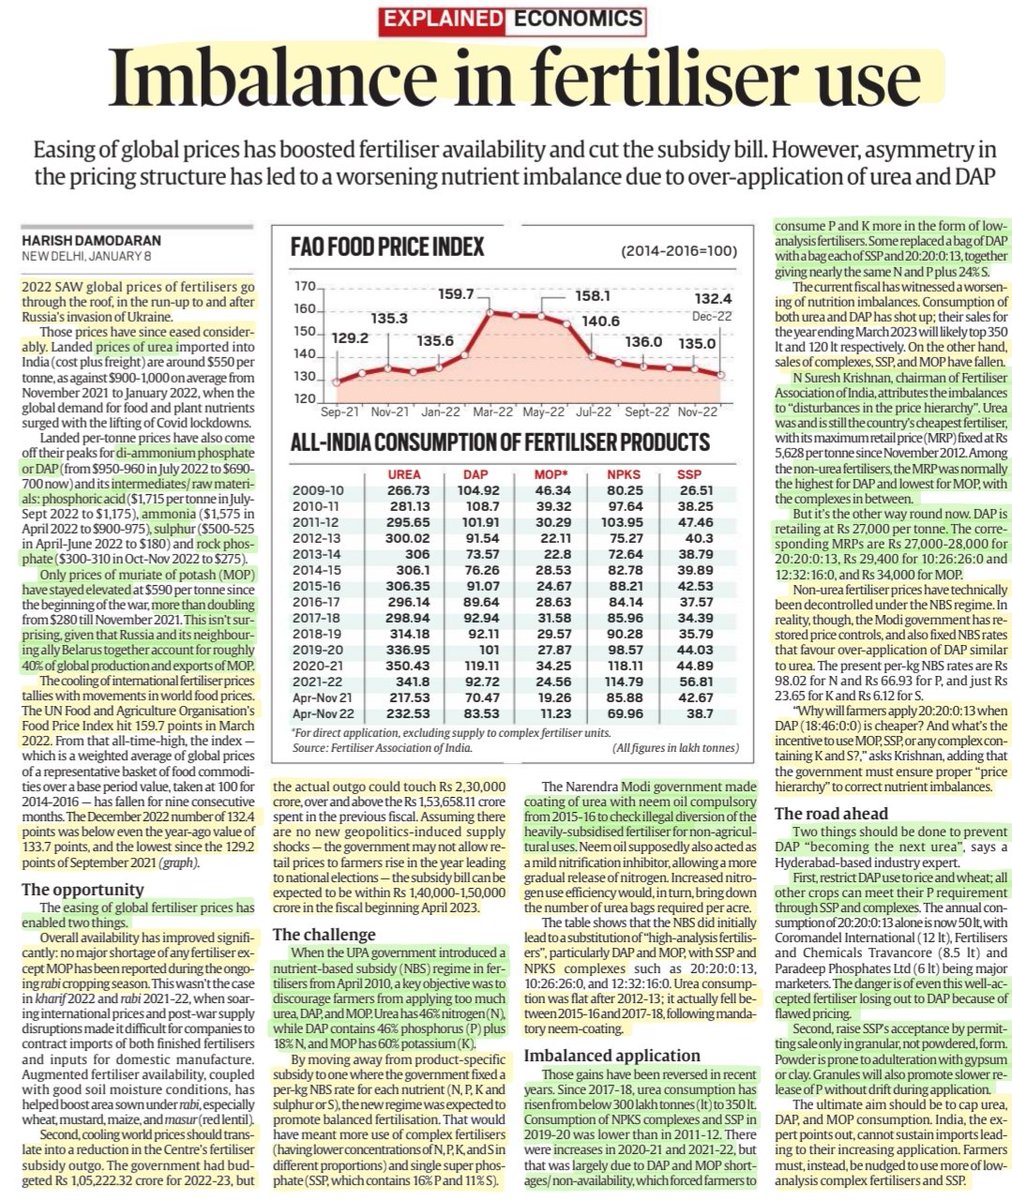 'Imbalance in Fetiliser use'
-well Explained
Details: Recommended & actual usage of different fertilizer,reasons, impact,Govt policy,#subsidy &
More info..

#fertilizer #agriculture #agriculturegrowth #Farming
#Soils4Nutrition #soilislife

#UPSC #upscprelims #UPSC2023

Source: IE